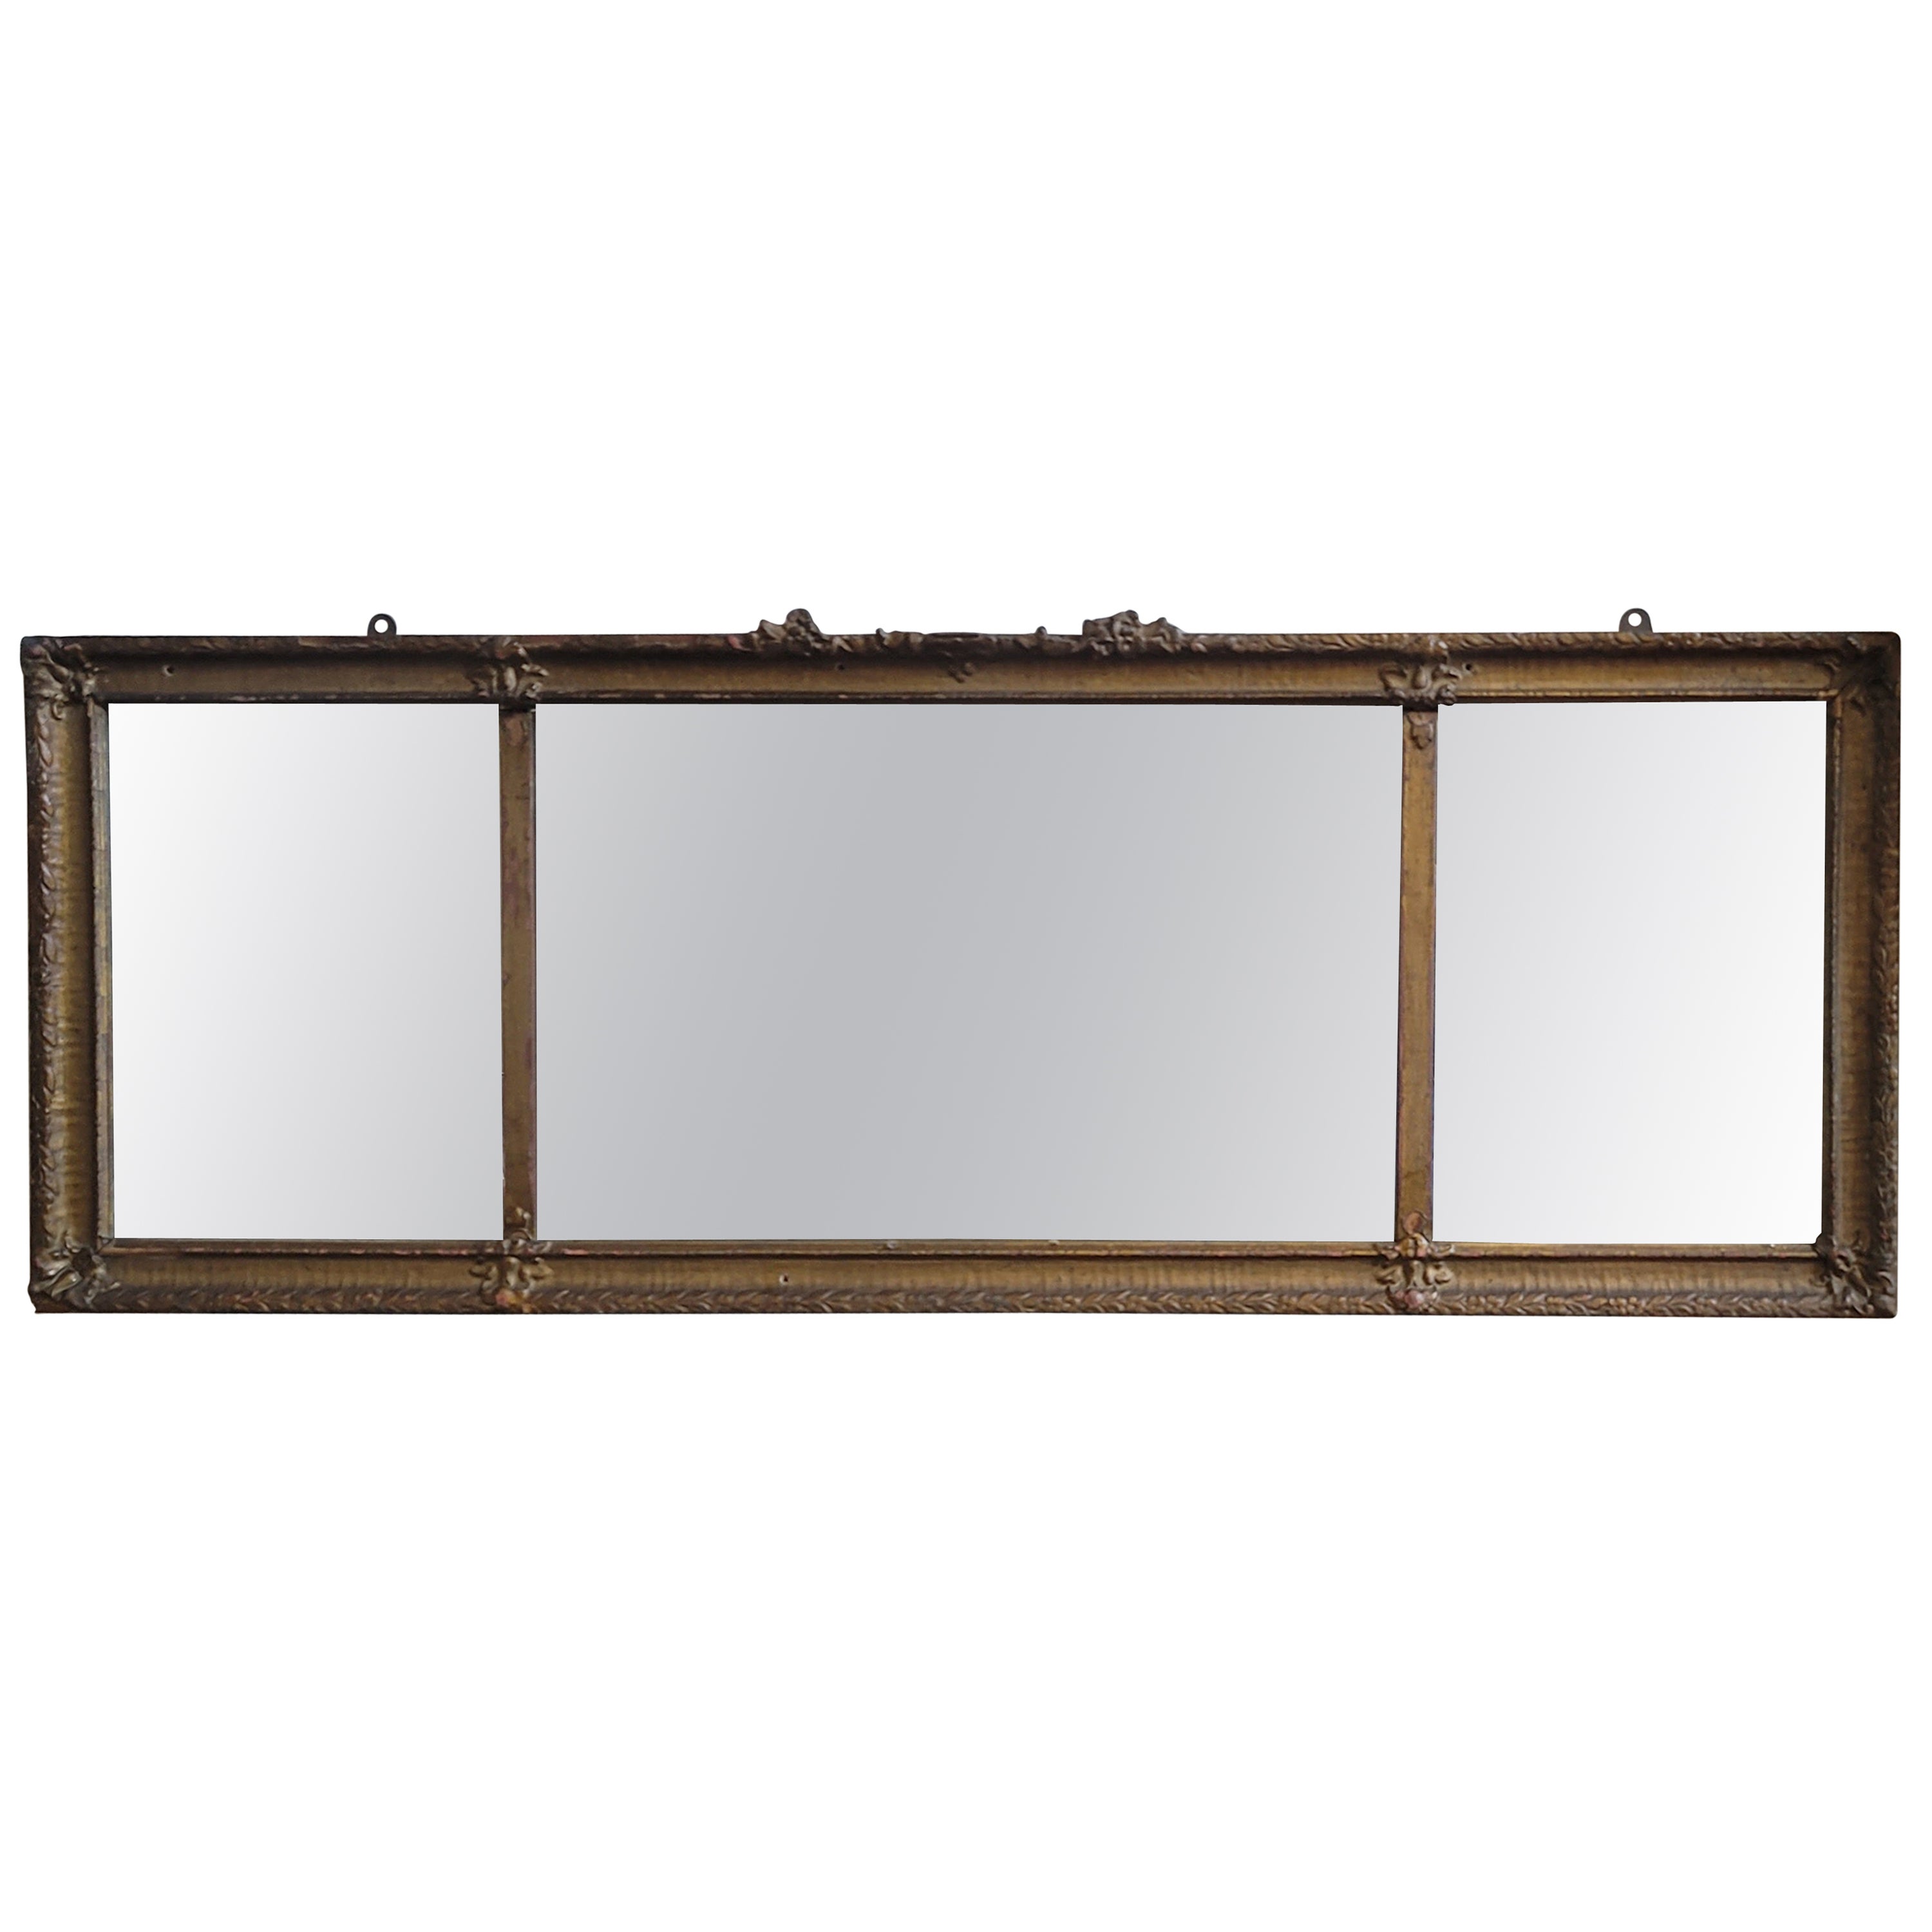 19th Century Trisection Ornate Giltwood Overmantel Fireplace Mirror, Circa 1880s For Sale